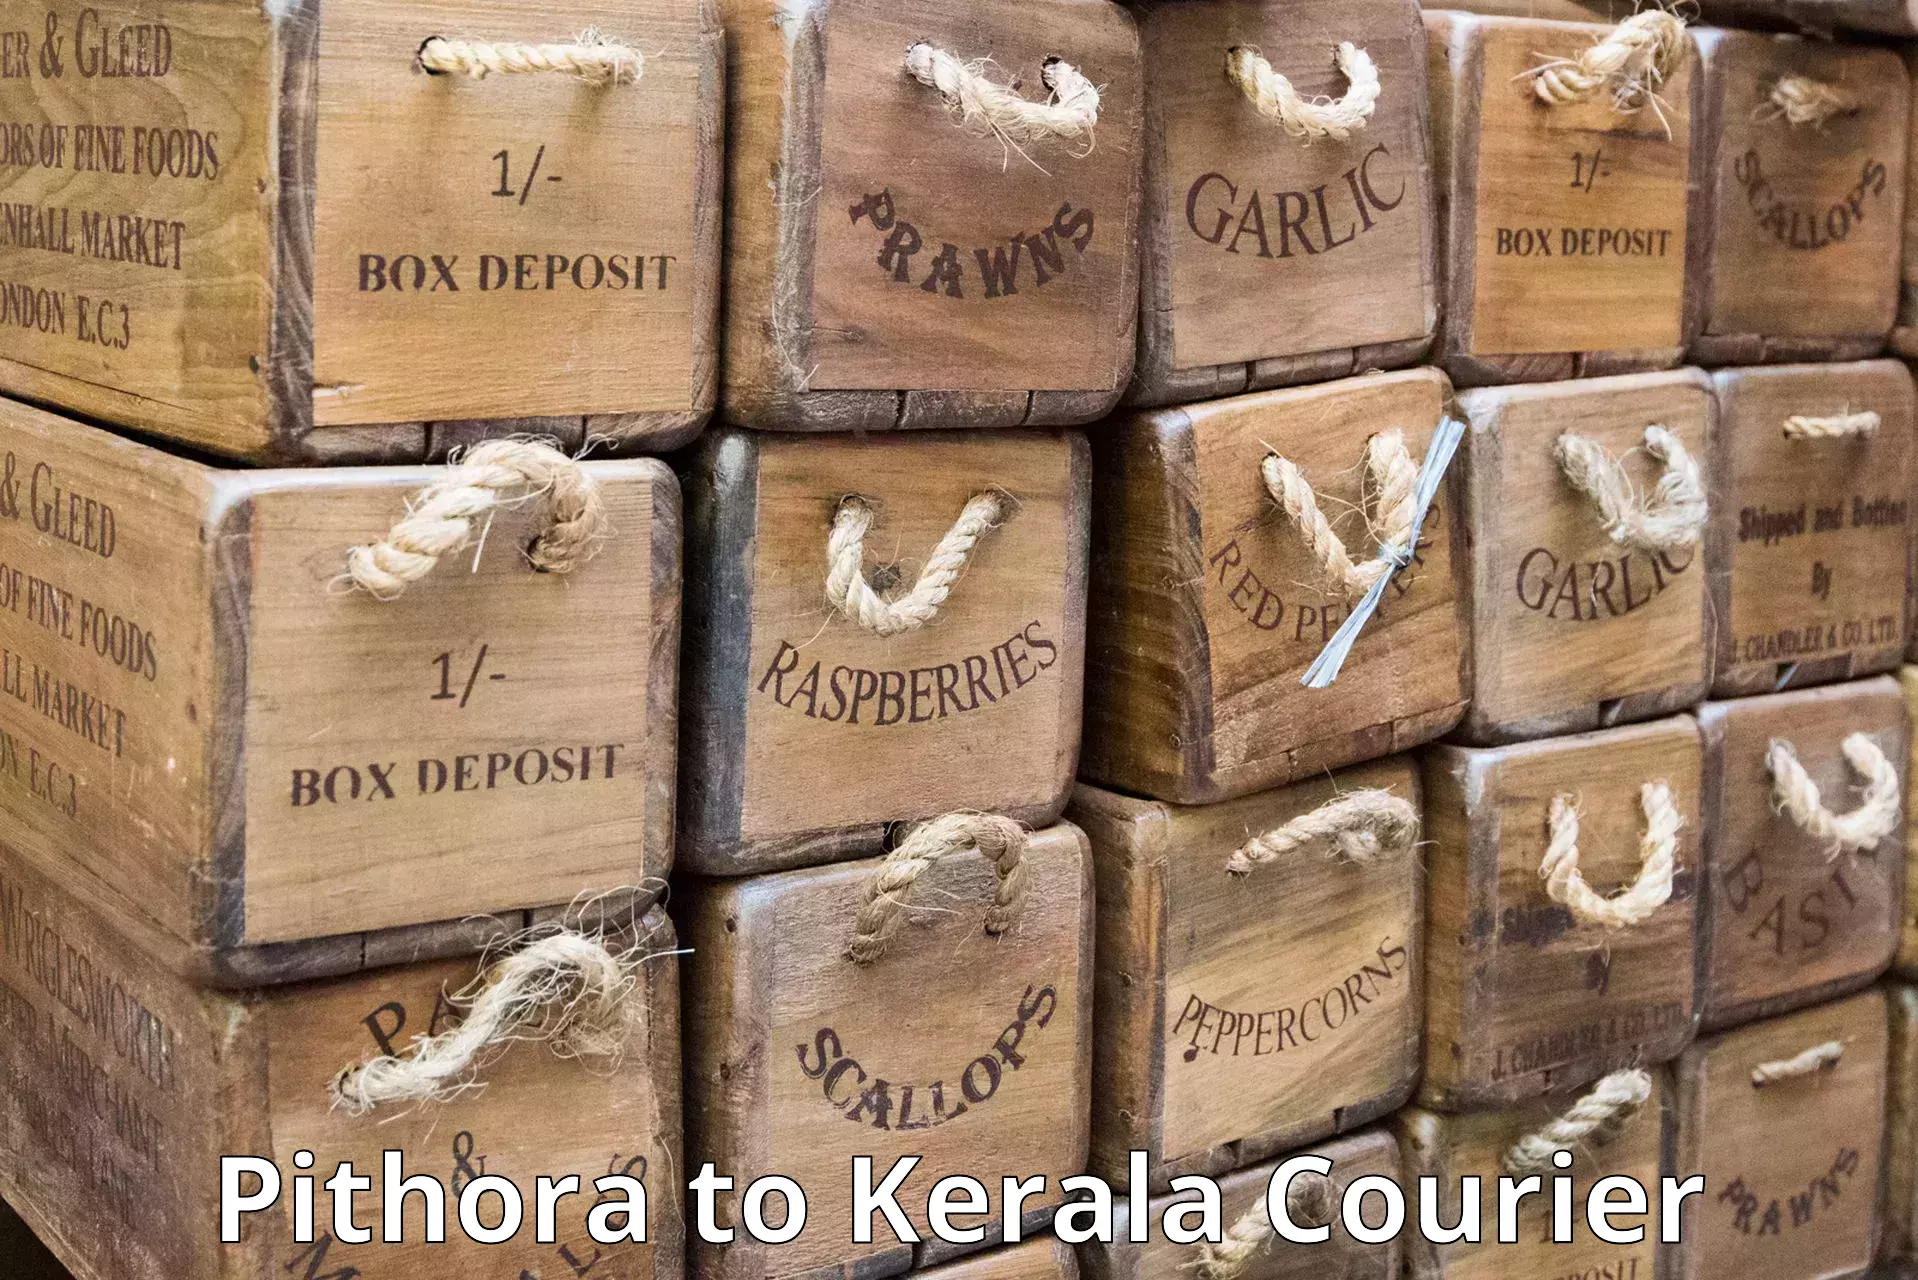 Expedited shipping solutions Pithora to Cochin Port Kochi